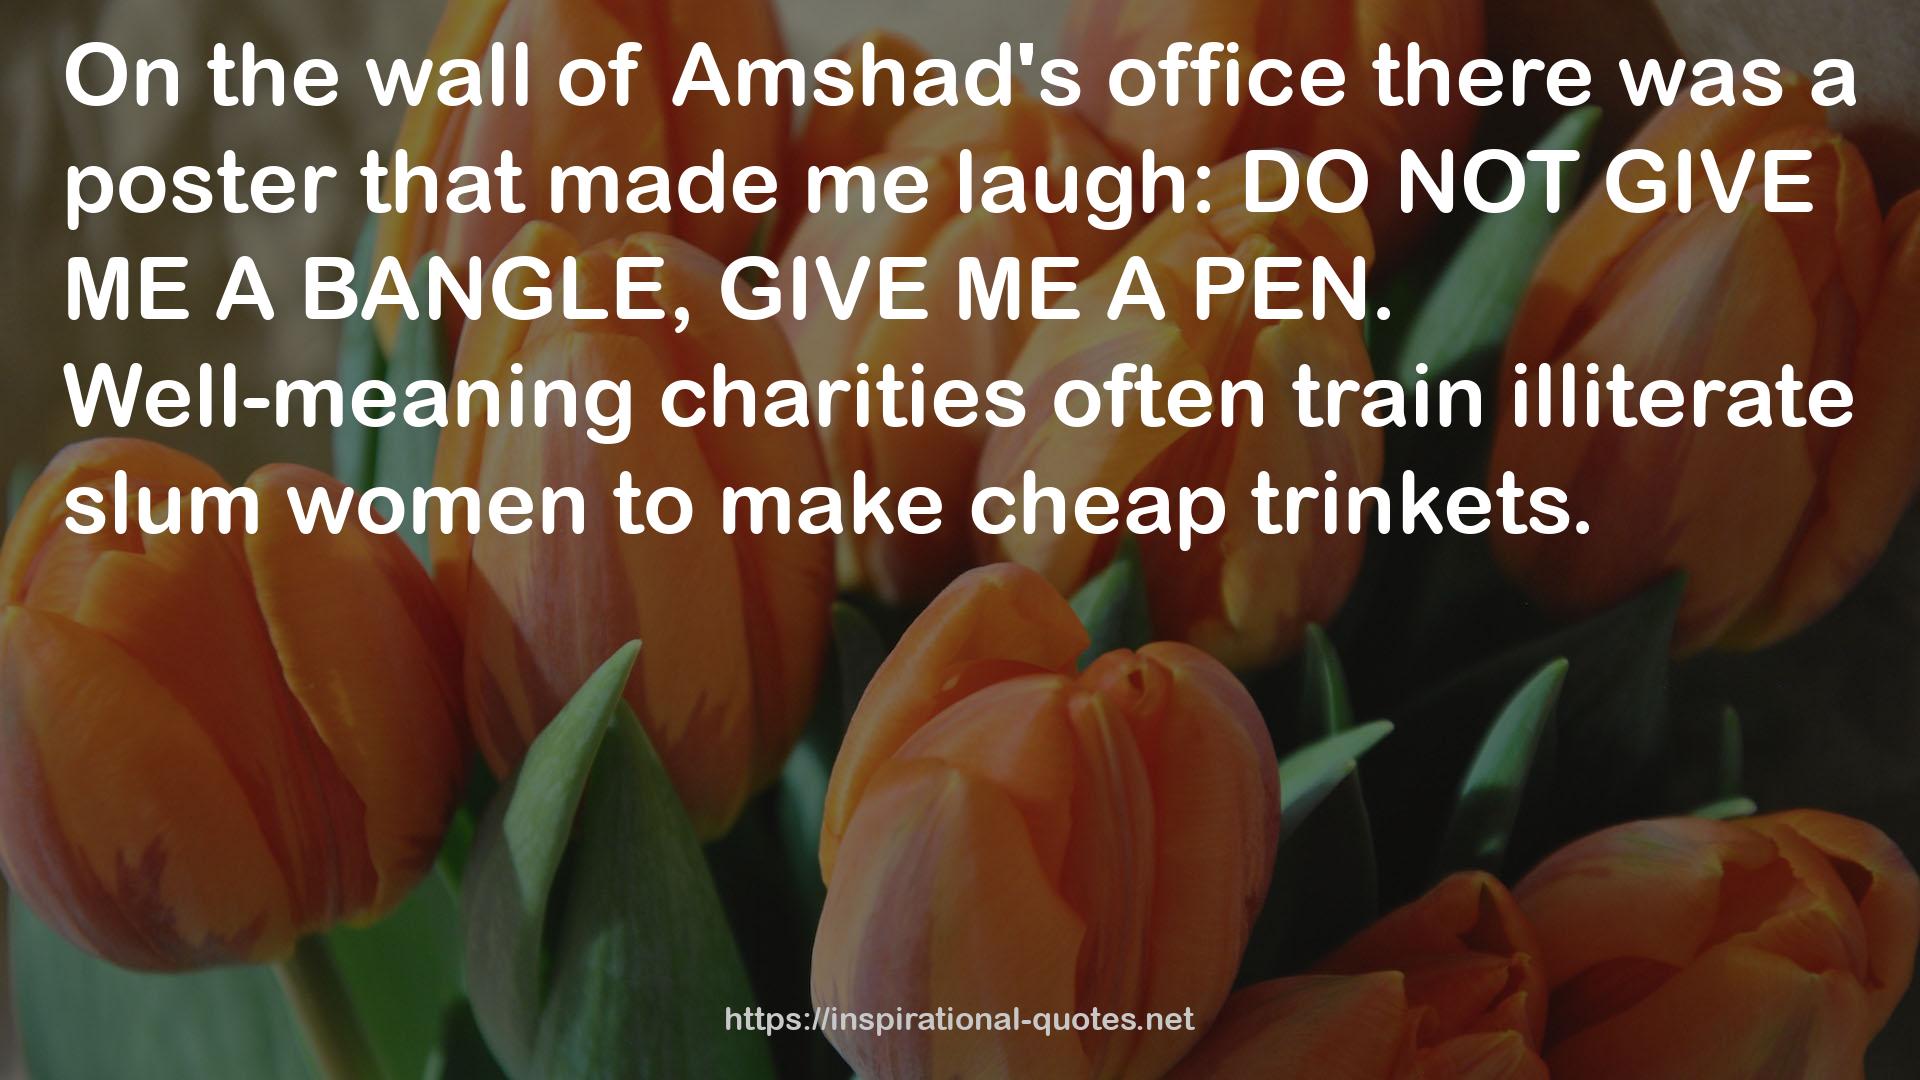 Amshad's office  QUOTES